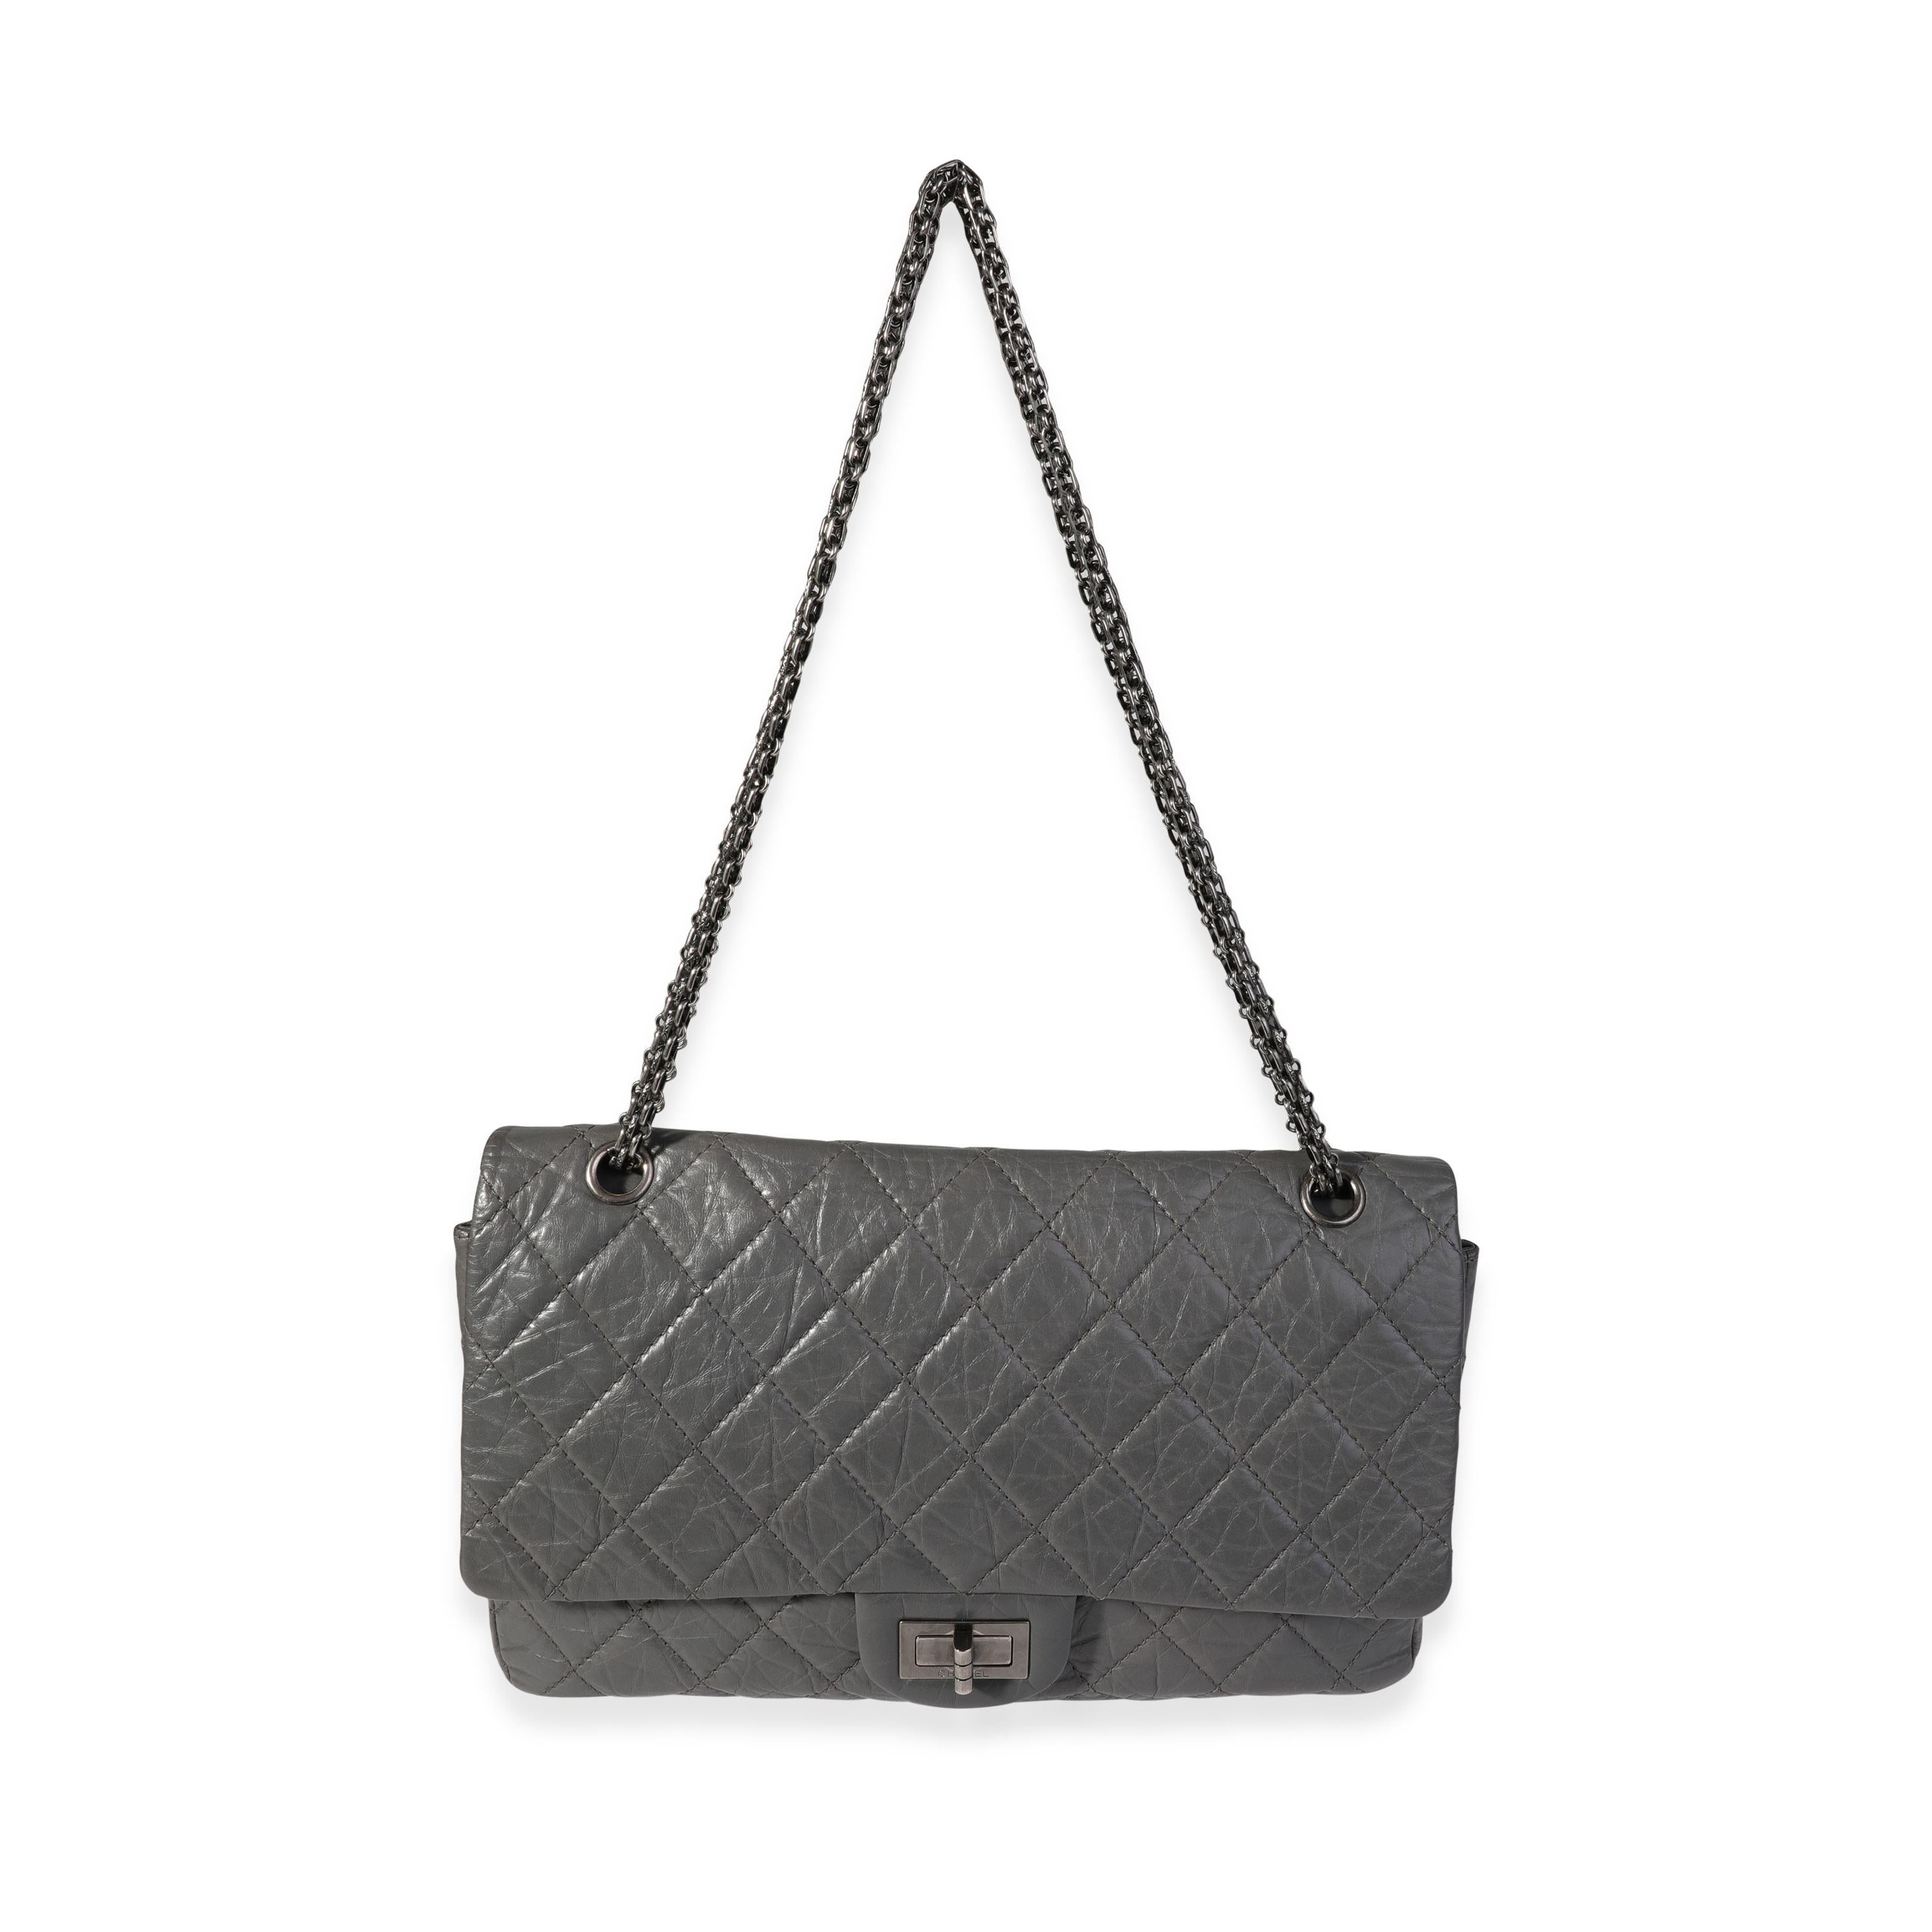 Listing Title: Chanel Gray Quilted Aged Calfskin Reissue 2.55 227 Double Flap Bag
SKU: 121120
Condition: Pre-owned 
Handbag Condition: Very Good
Condition Comments: Very Good Condition. Light scuffing to corners. Light scuffing and discoloration at